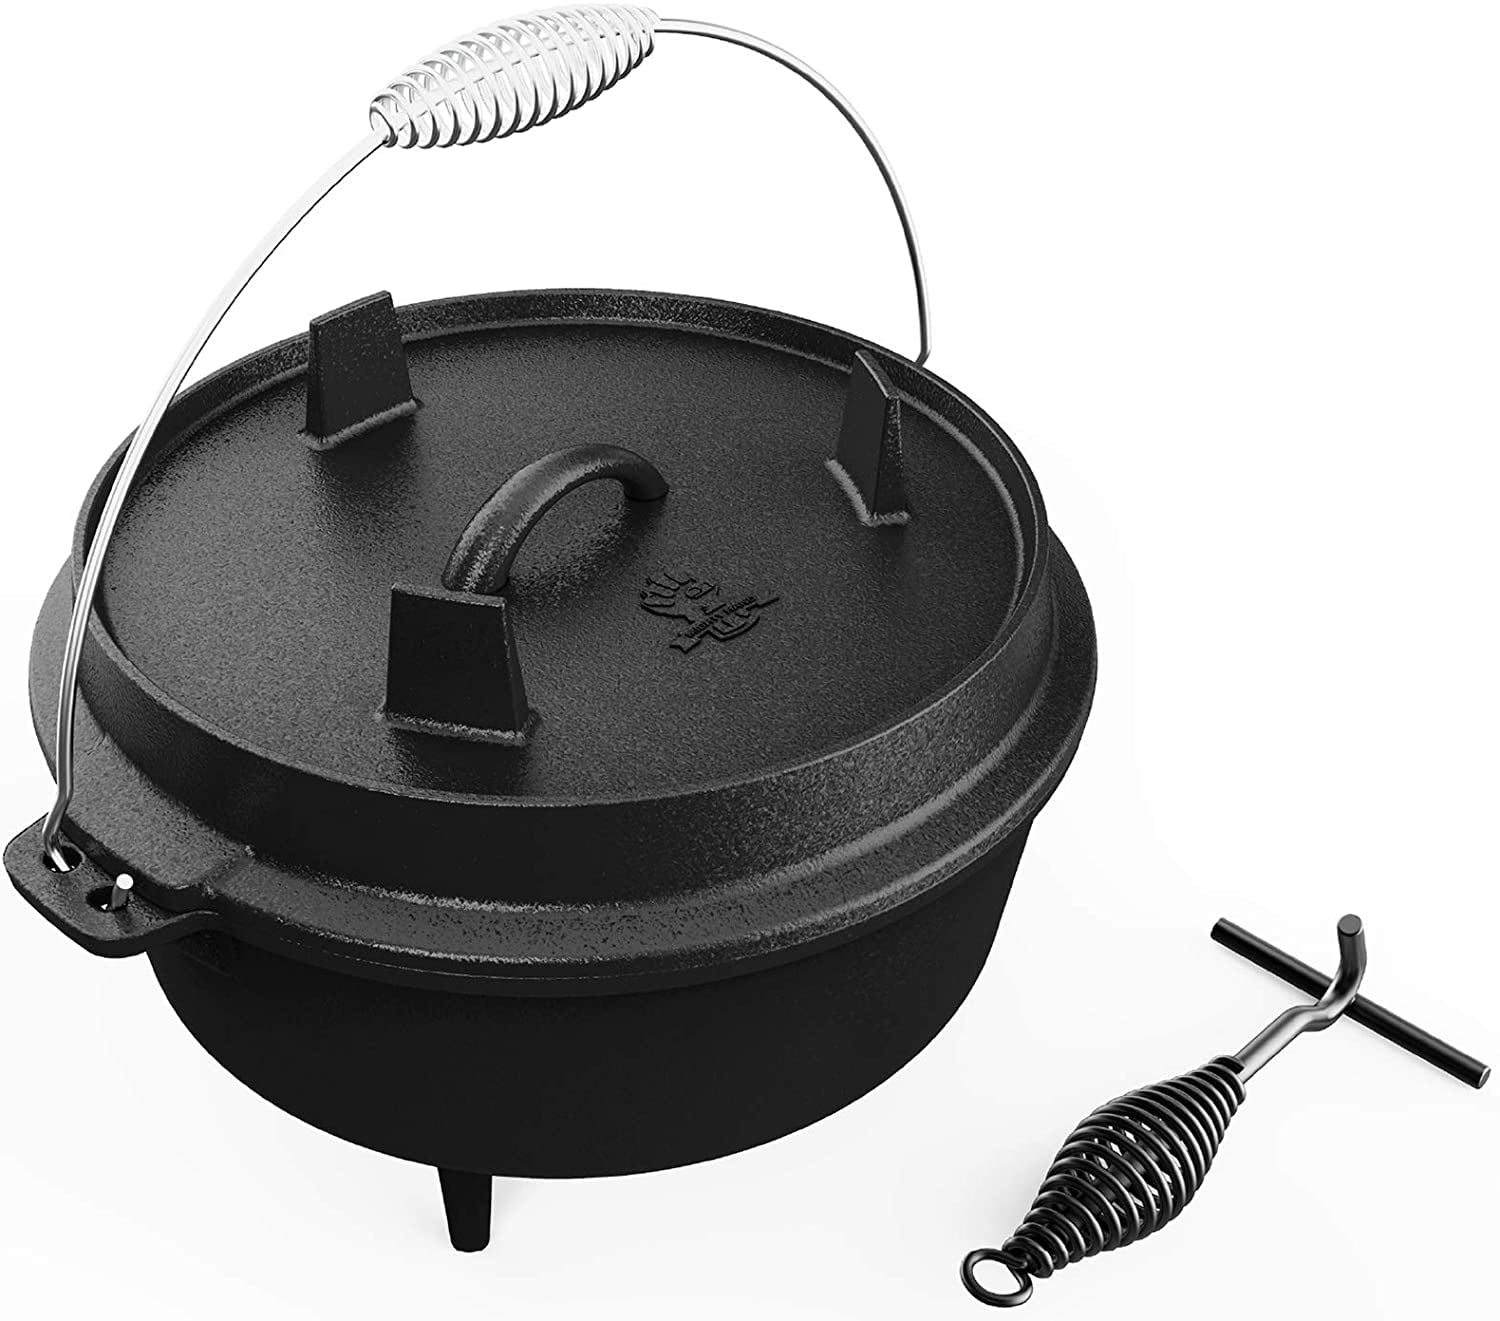 Details about   12” 6 QT Gourmet Cast Iron Dutch Oven Camping Outdoor Cooking 